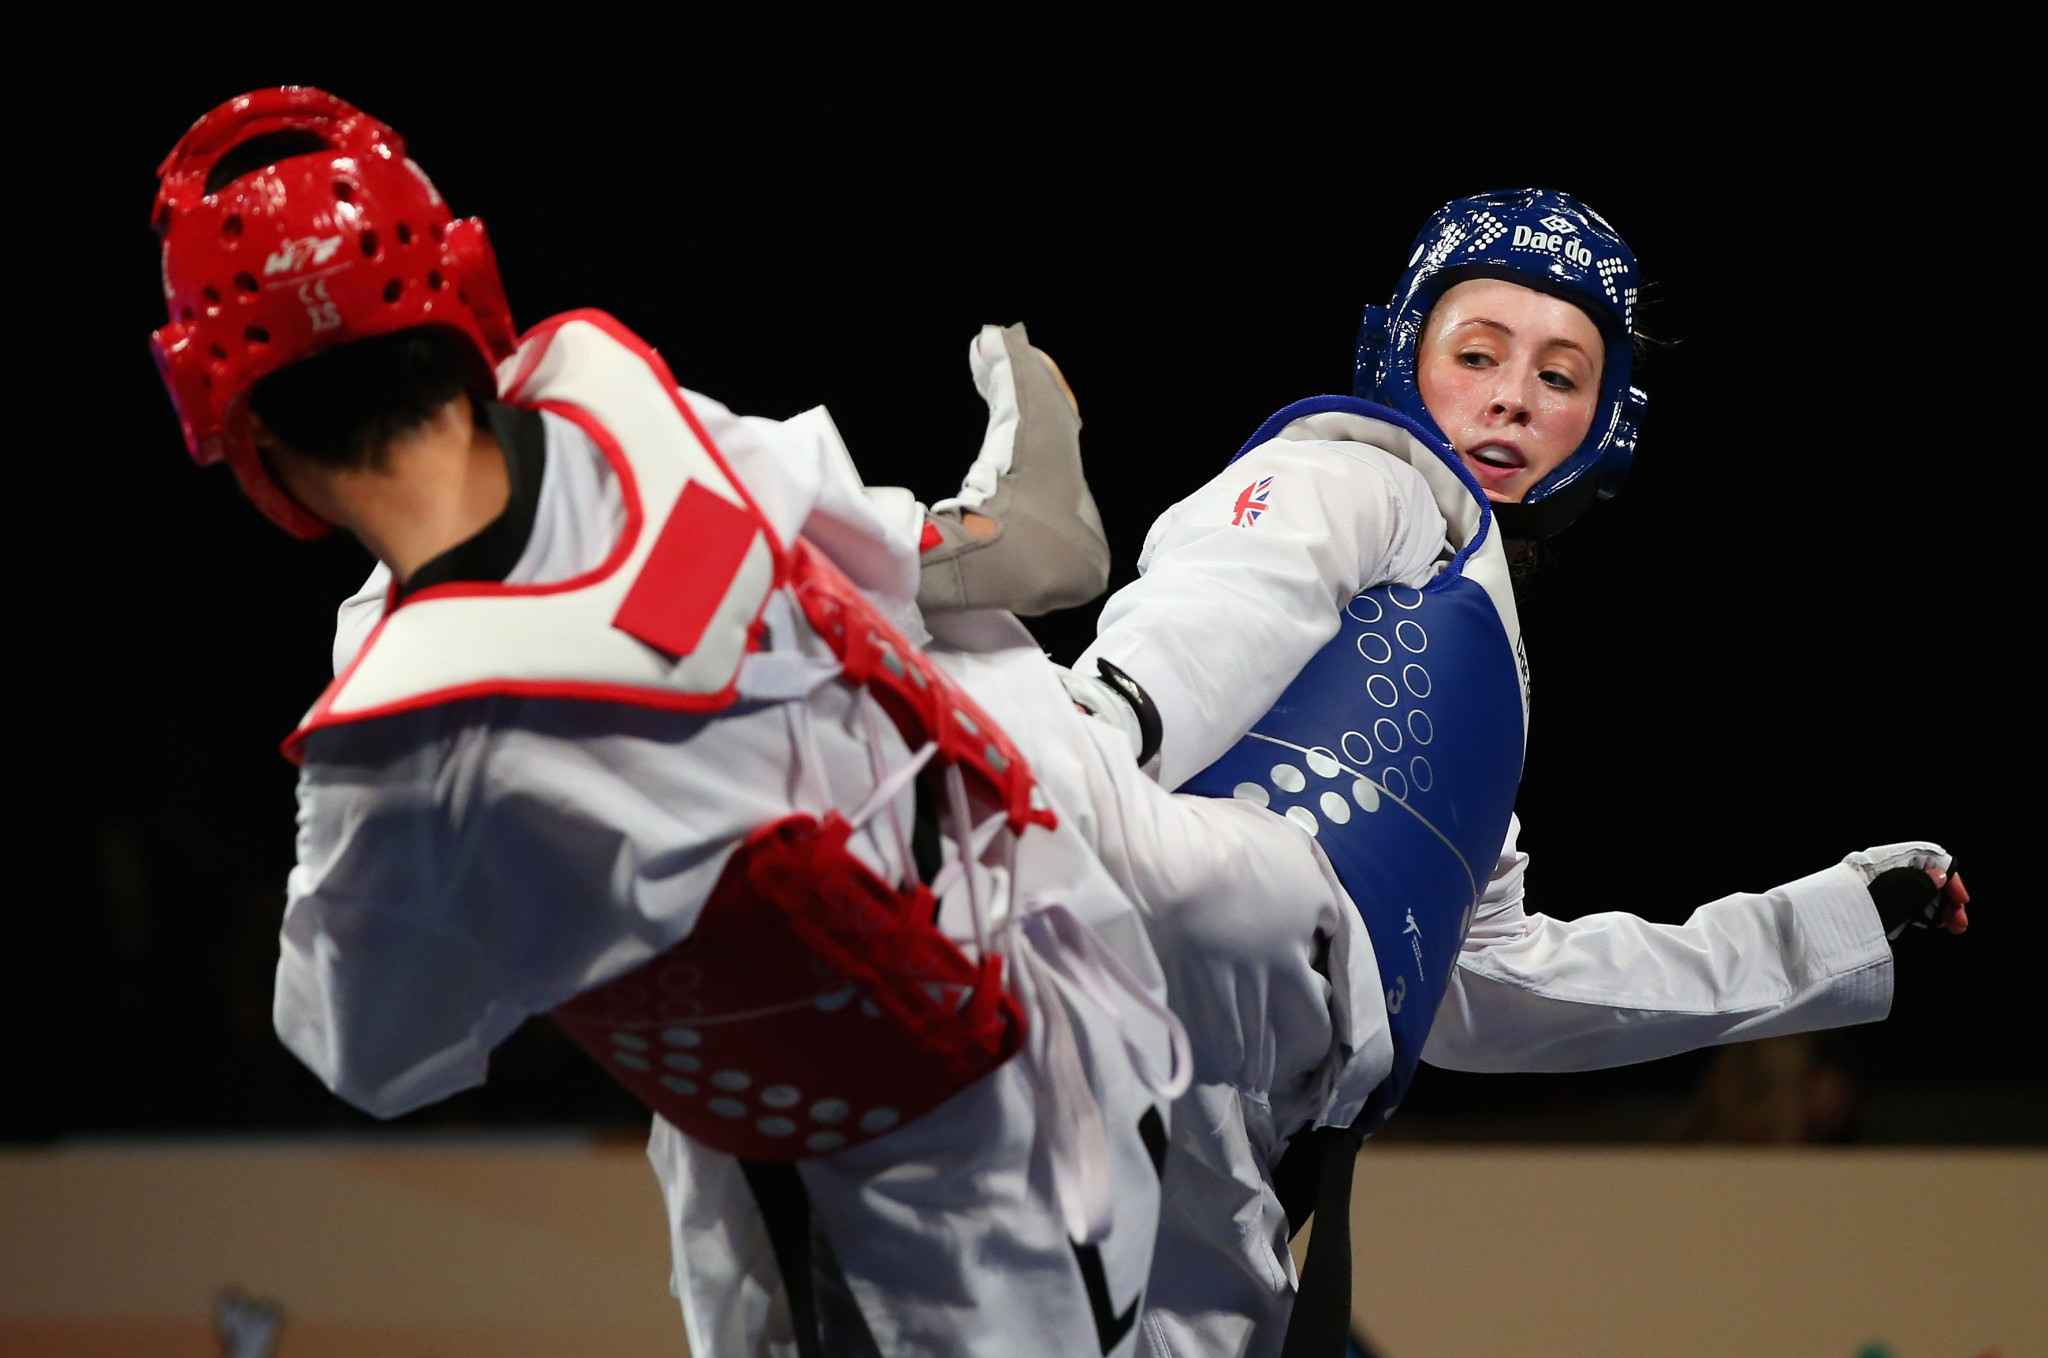 Milan to host European taekwondo qualifiers for Olympic and Paralympic Games